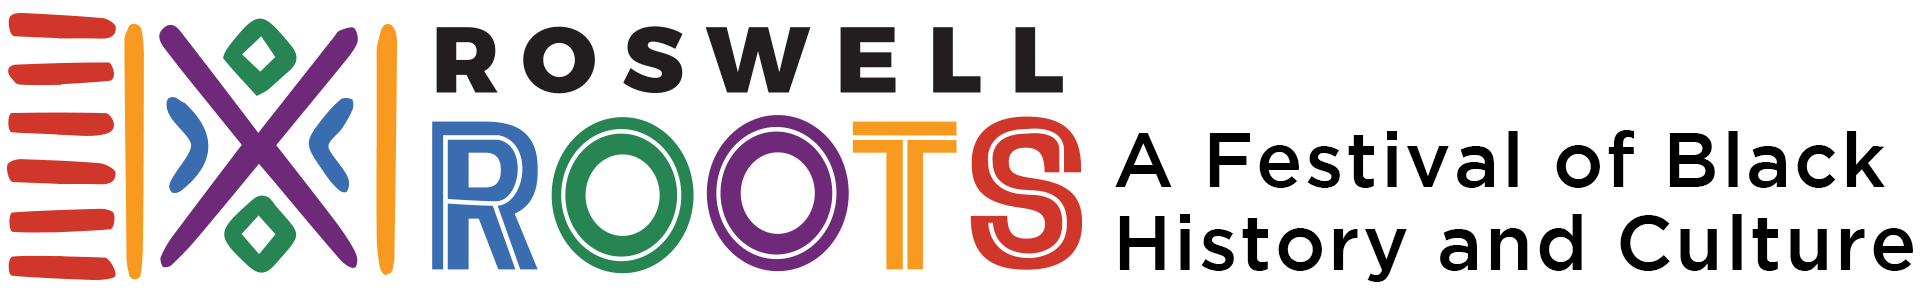 Roswell Roots Logo and Tagline